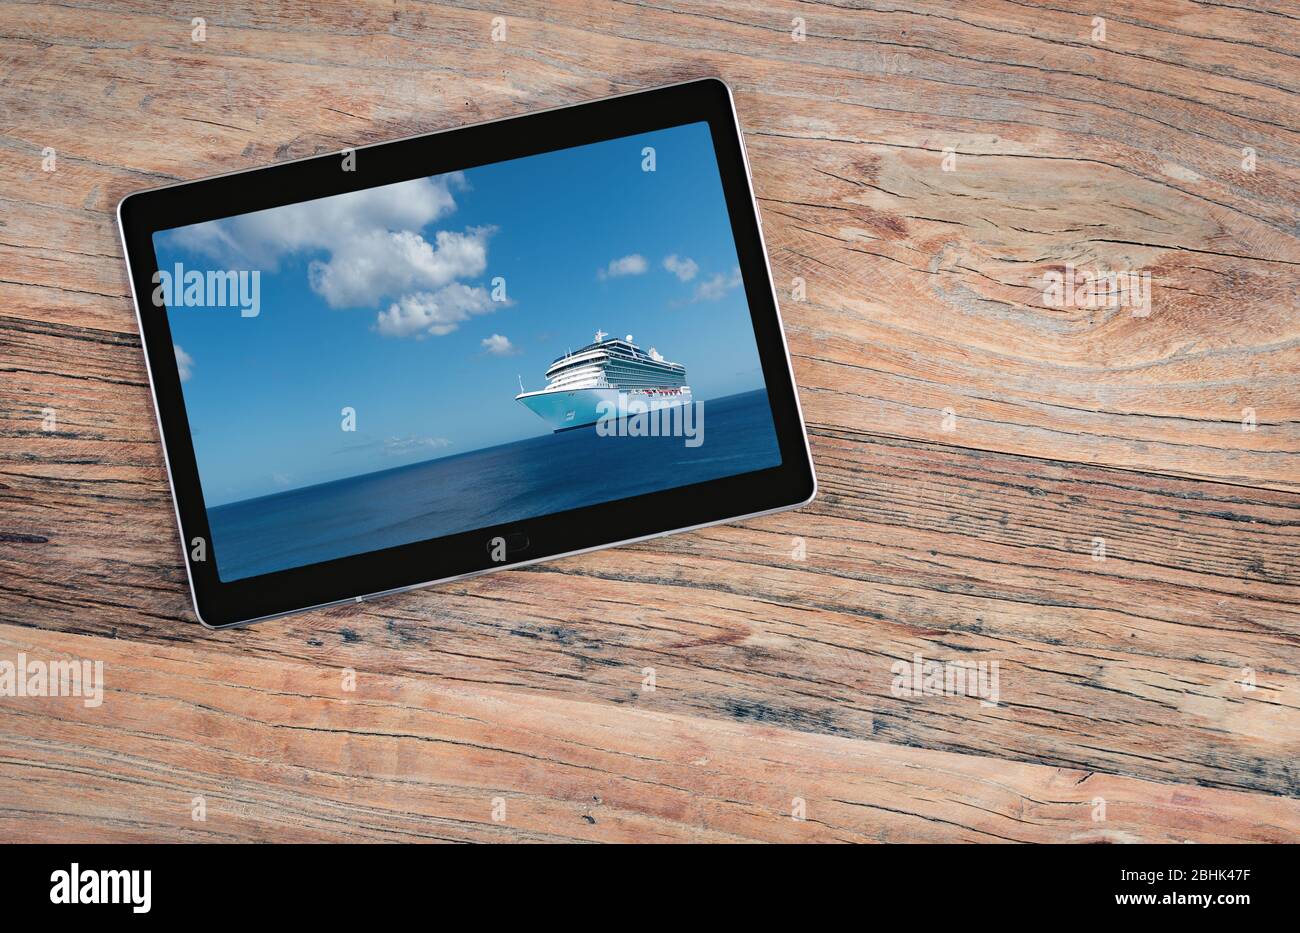 Cruise ship on screen of digital tablet. Top view of mobile pc device on old wooden table. Cruise travel and travel agency sales concept. Stock Photo